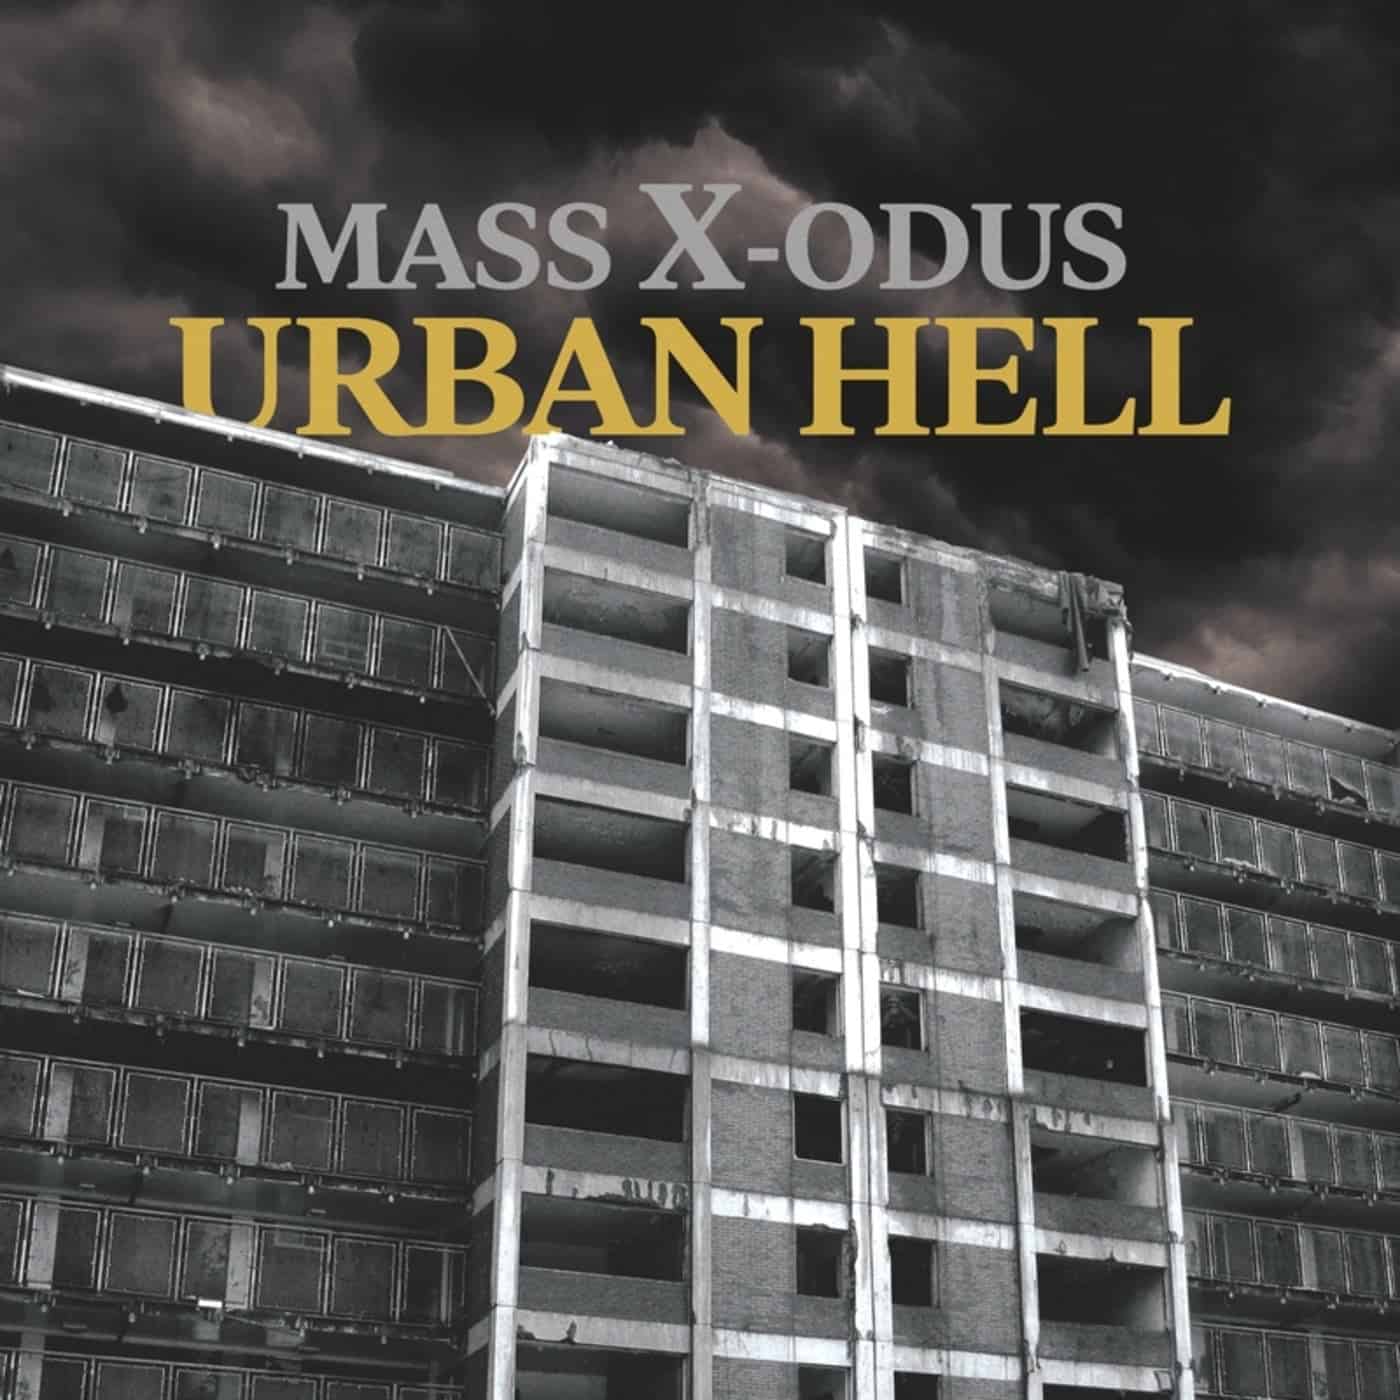 Download Mass X-odus - Urban Hell on Electrobuzz